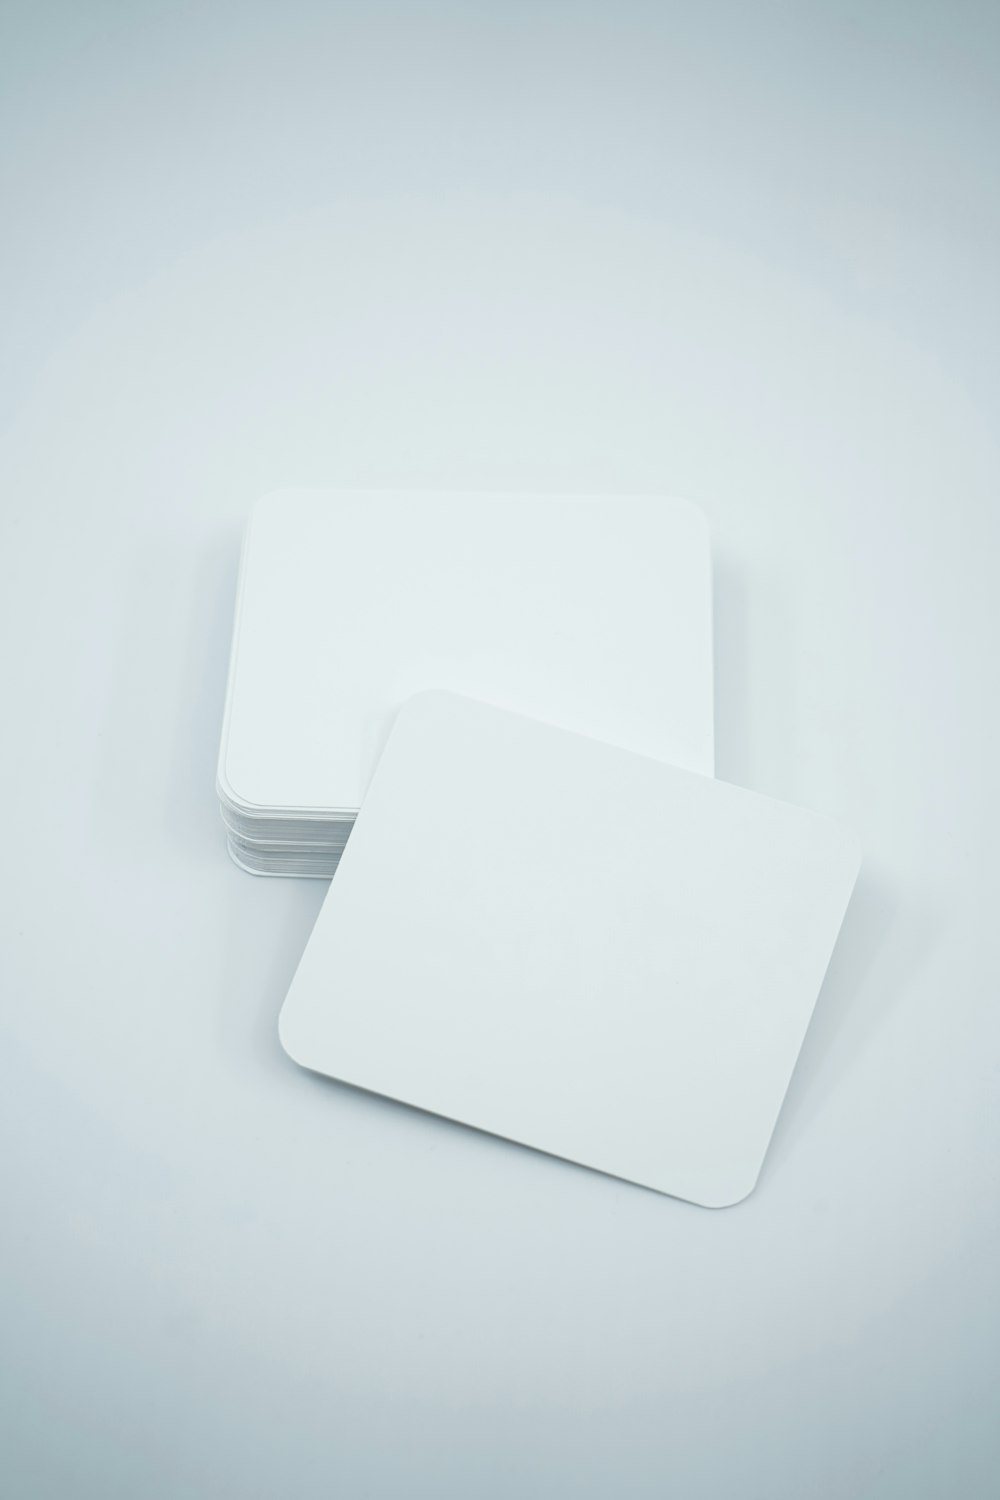 A stack of white cards sitting on top of each other photo – Free Stack of  cards Image on Unsplash